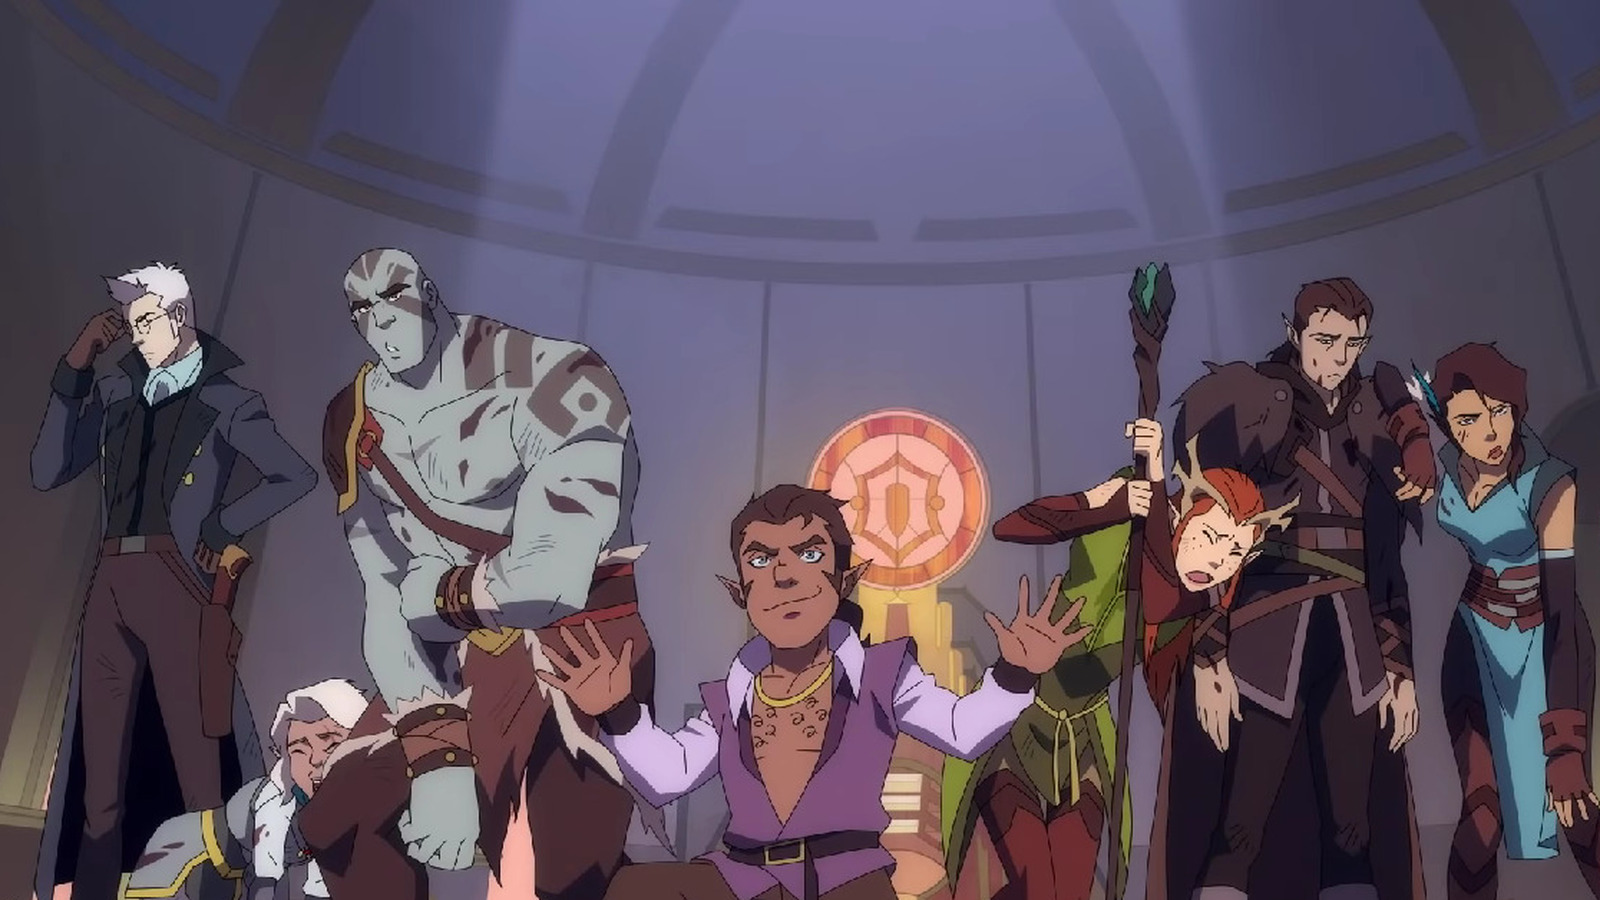 The Legend of Vox Machina (2022) TV Show Information & Trailers